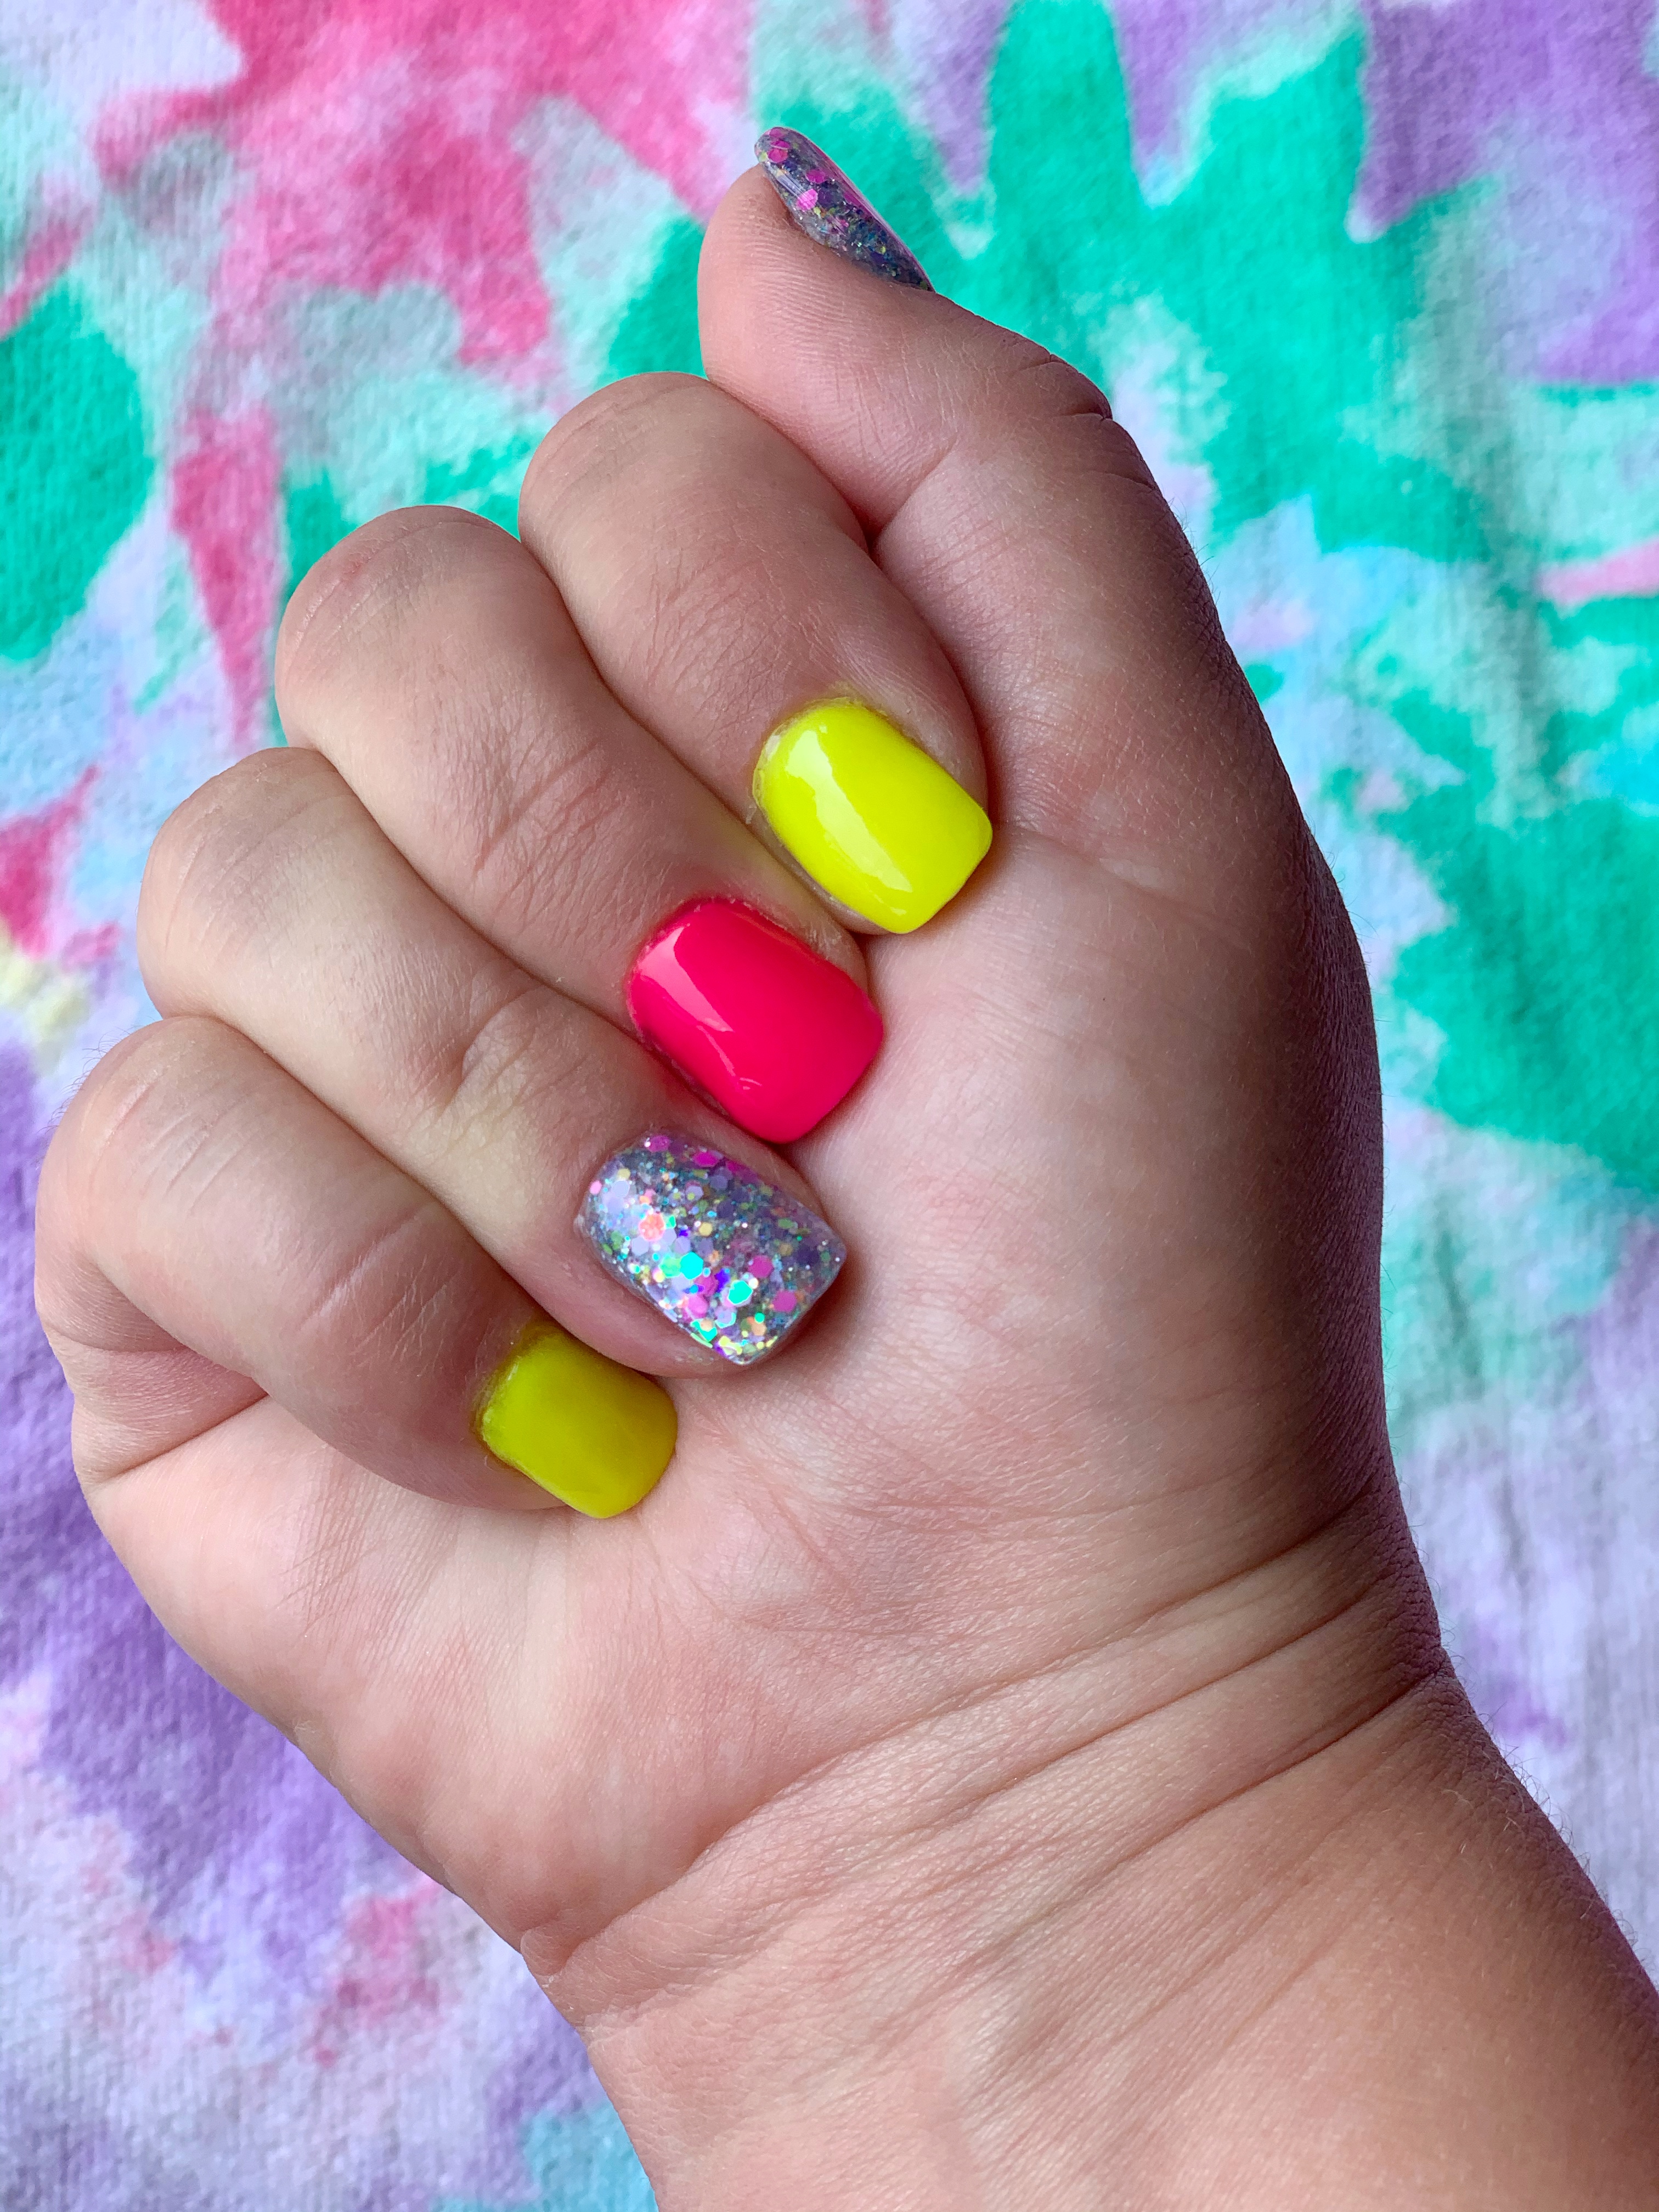 Vacation Nails 2021: The Best Beach Nail Designs for Summer | DipWell